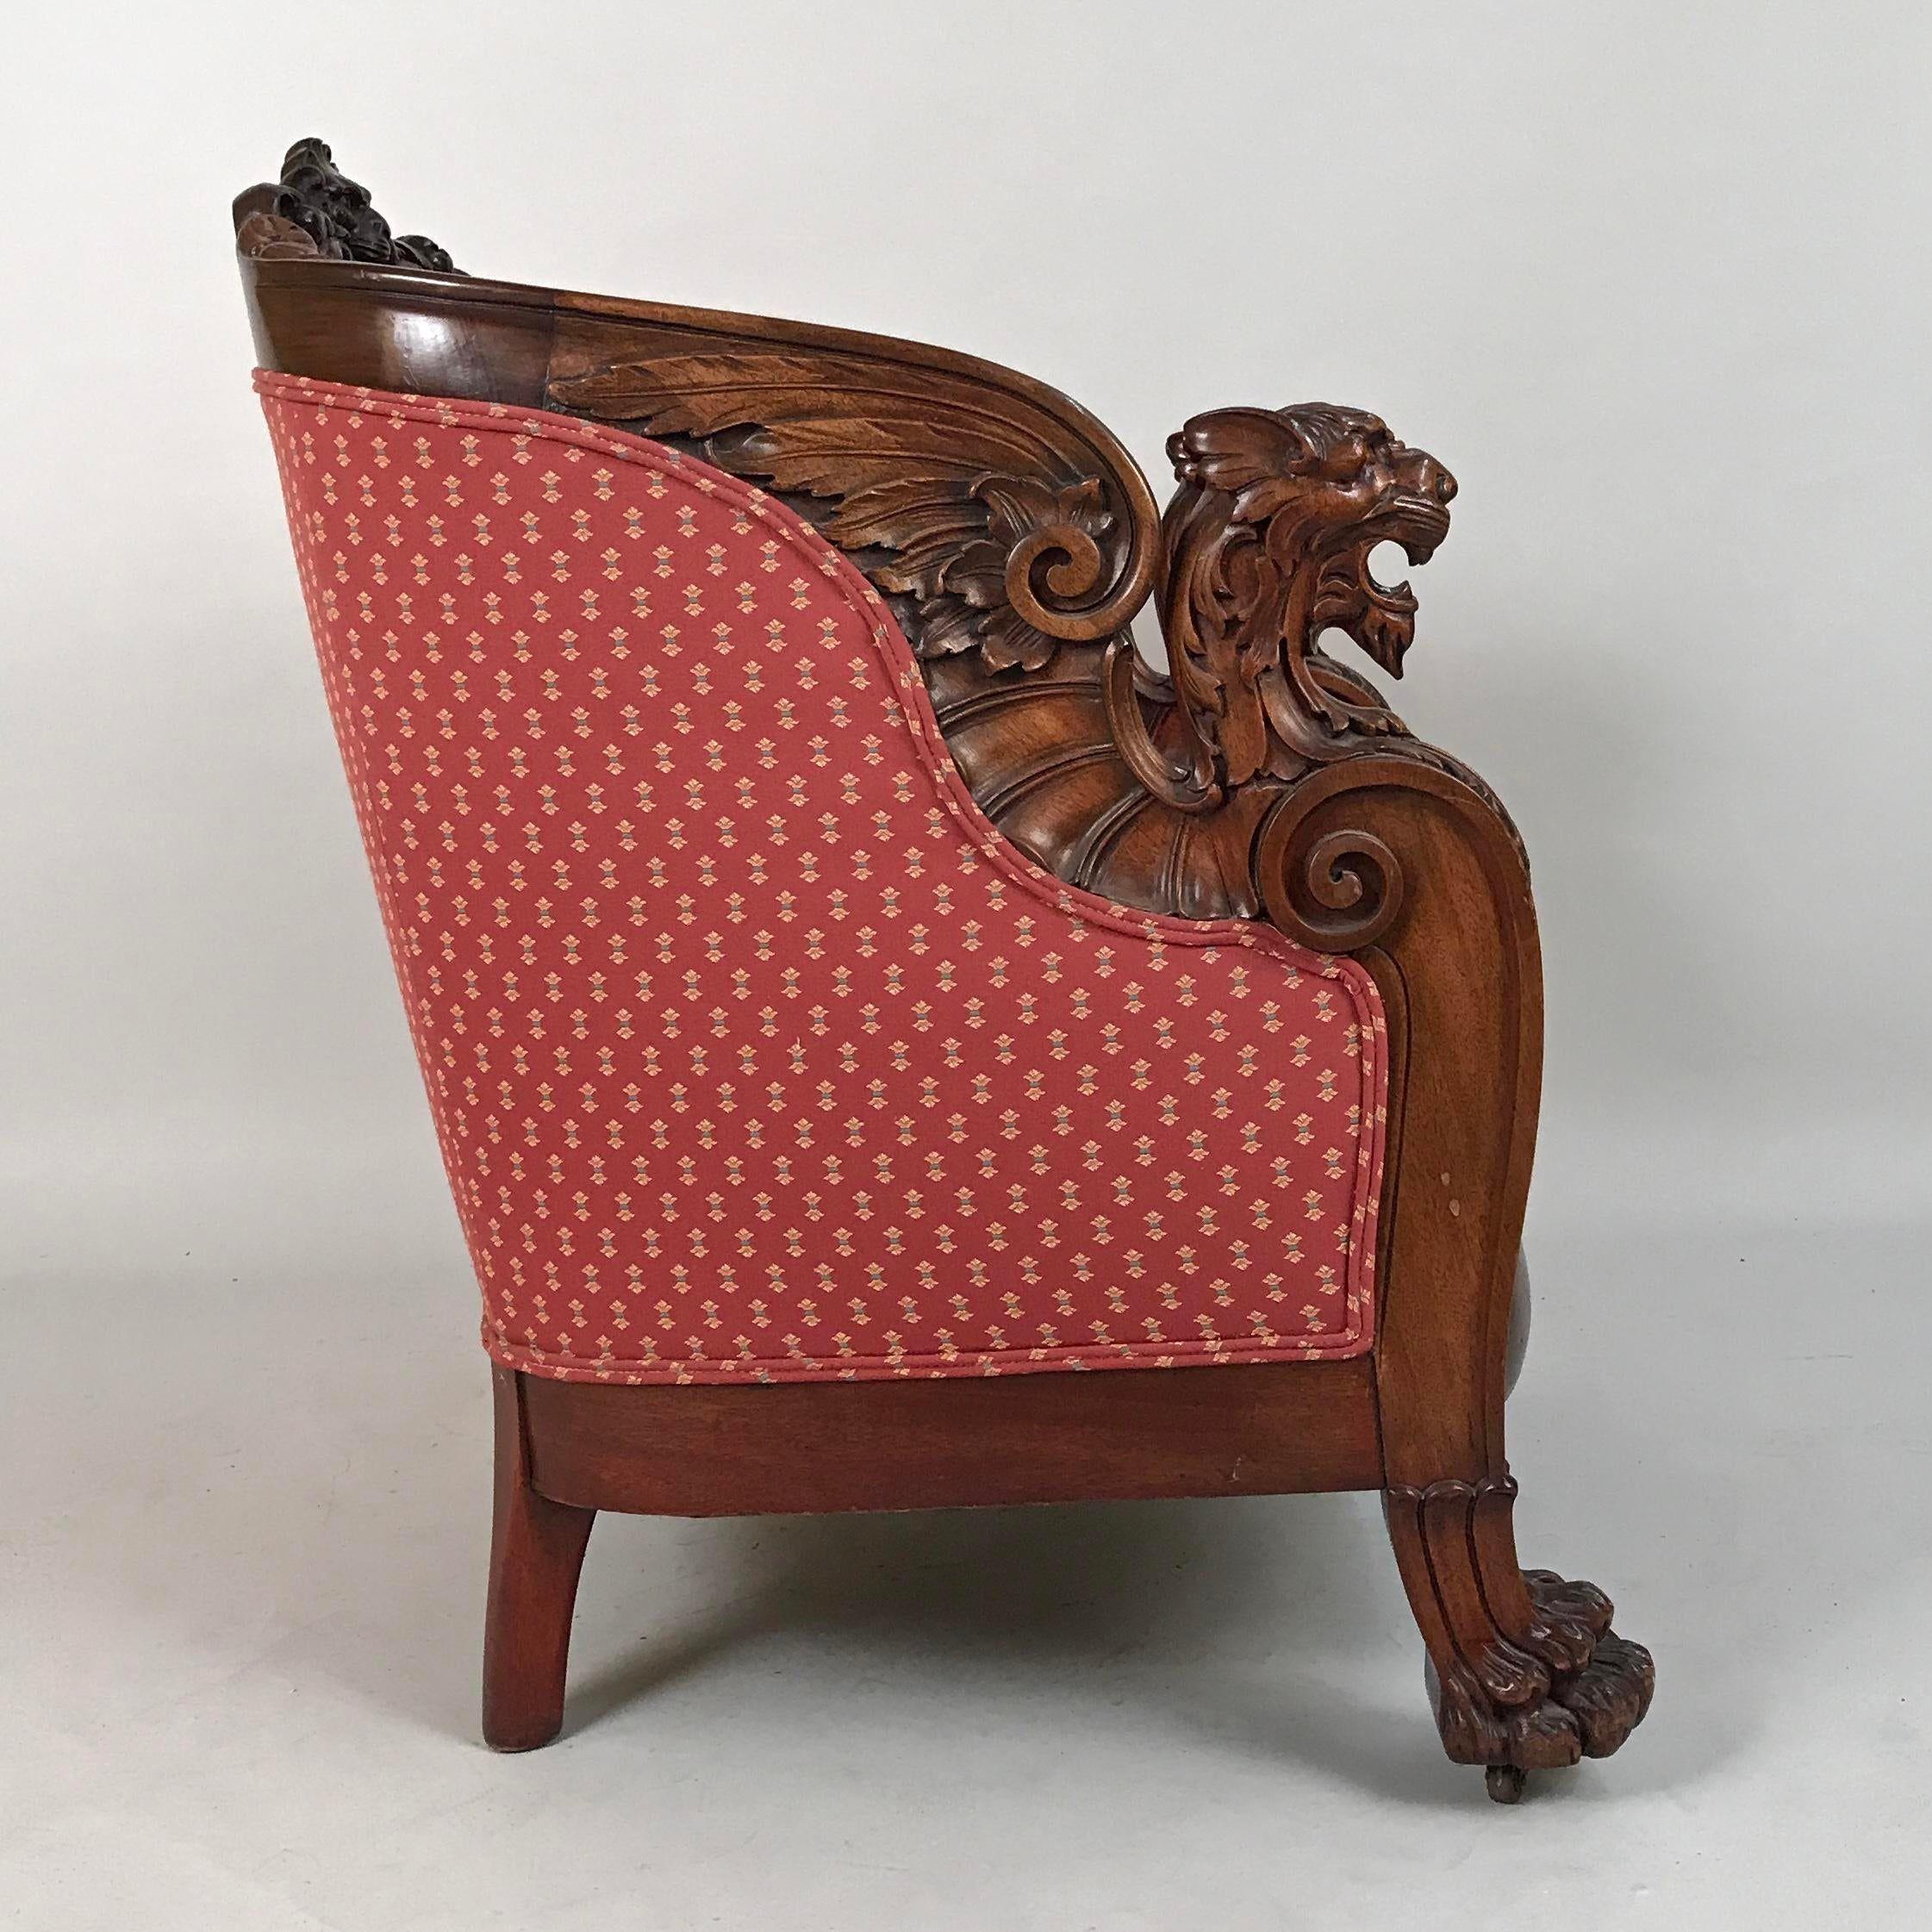 Hand-Carved Early 19th Century English Regency Mahogany Tub Chair Armchair For Sale